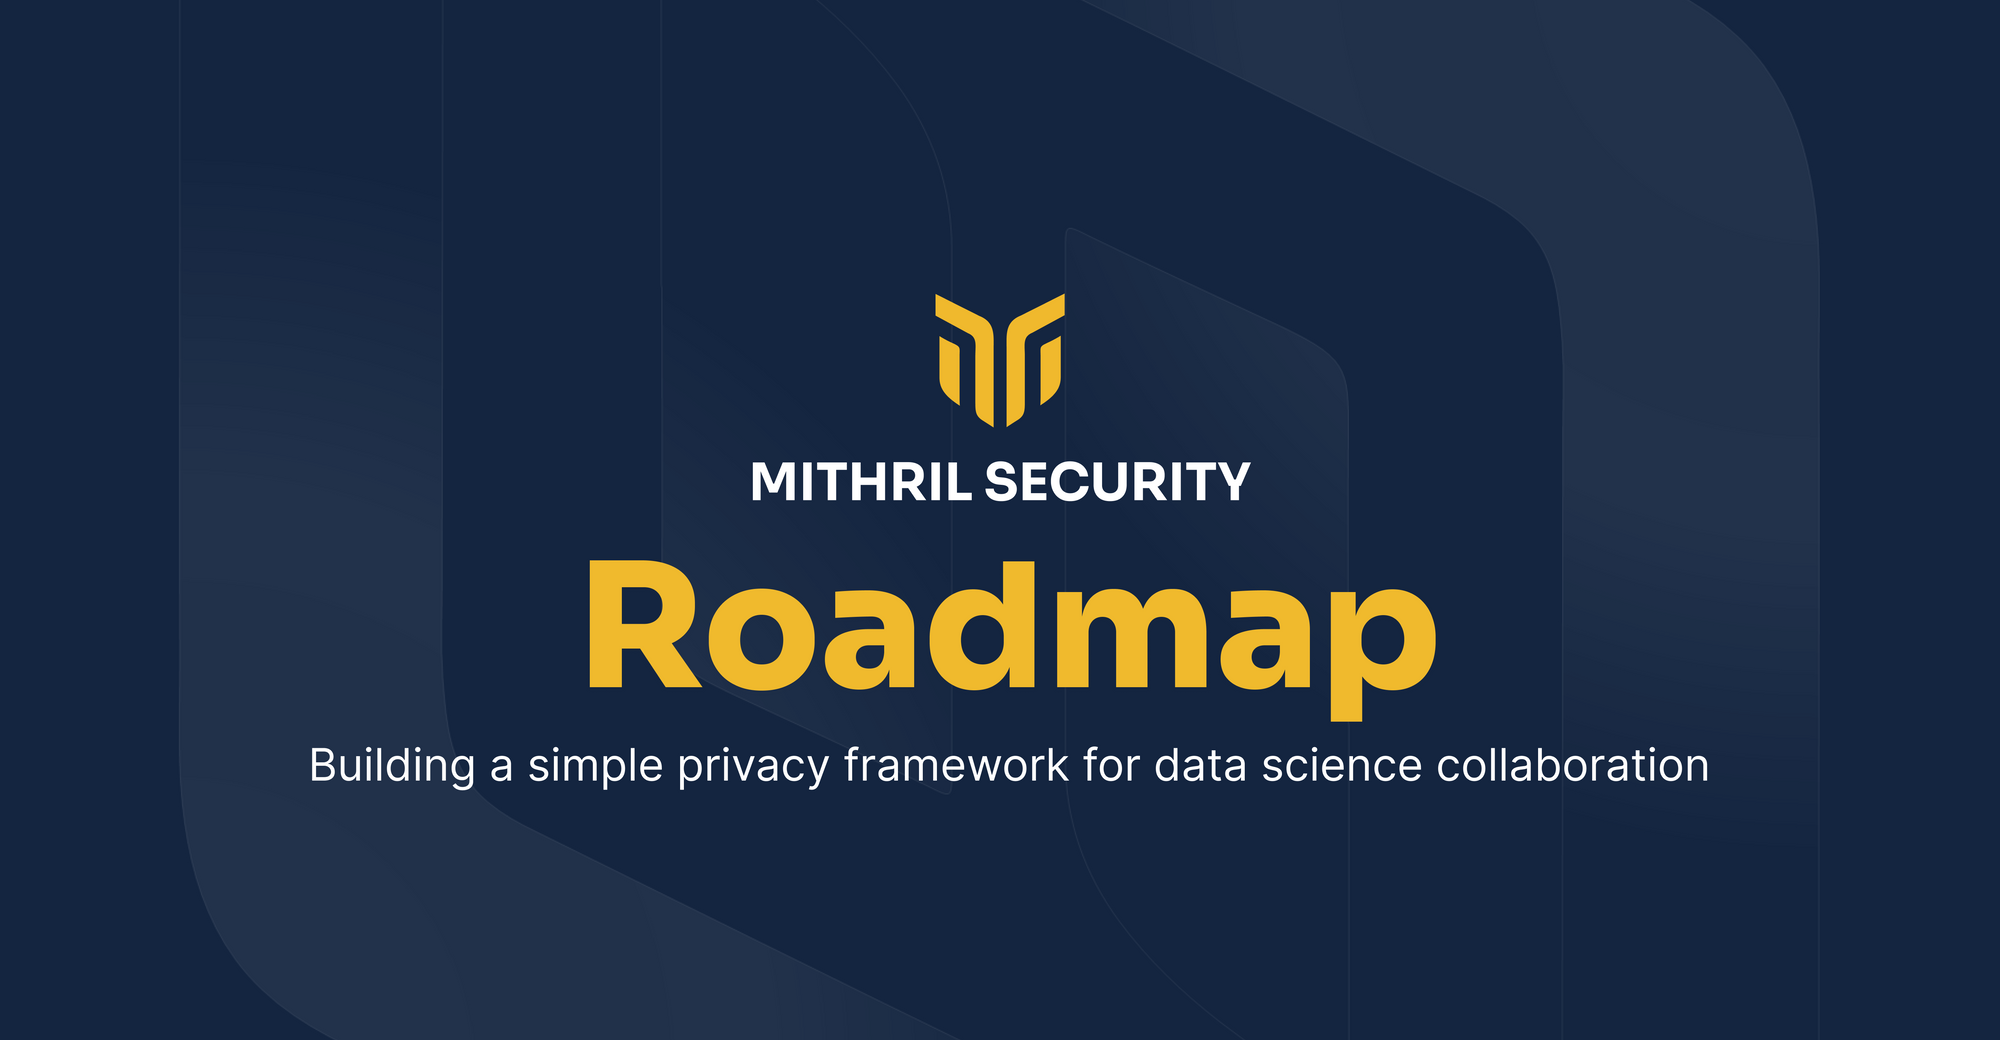 Our roadmap to build a simple privacy toolkit for data science collaboration